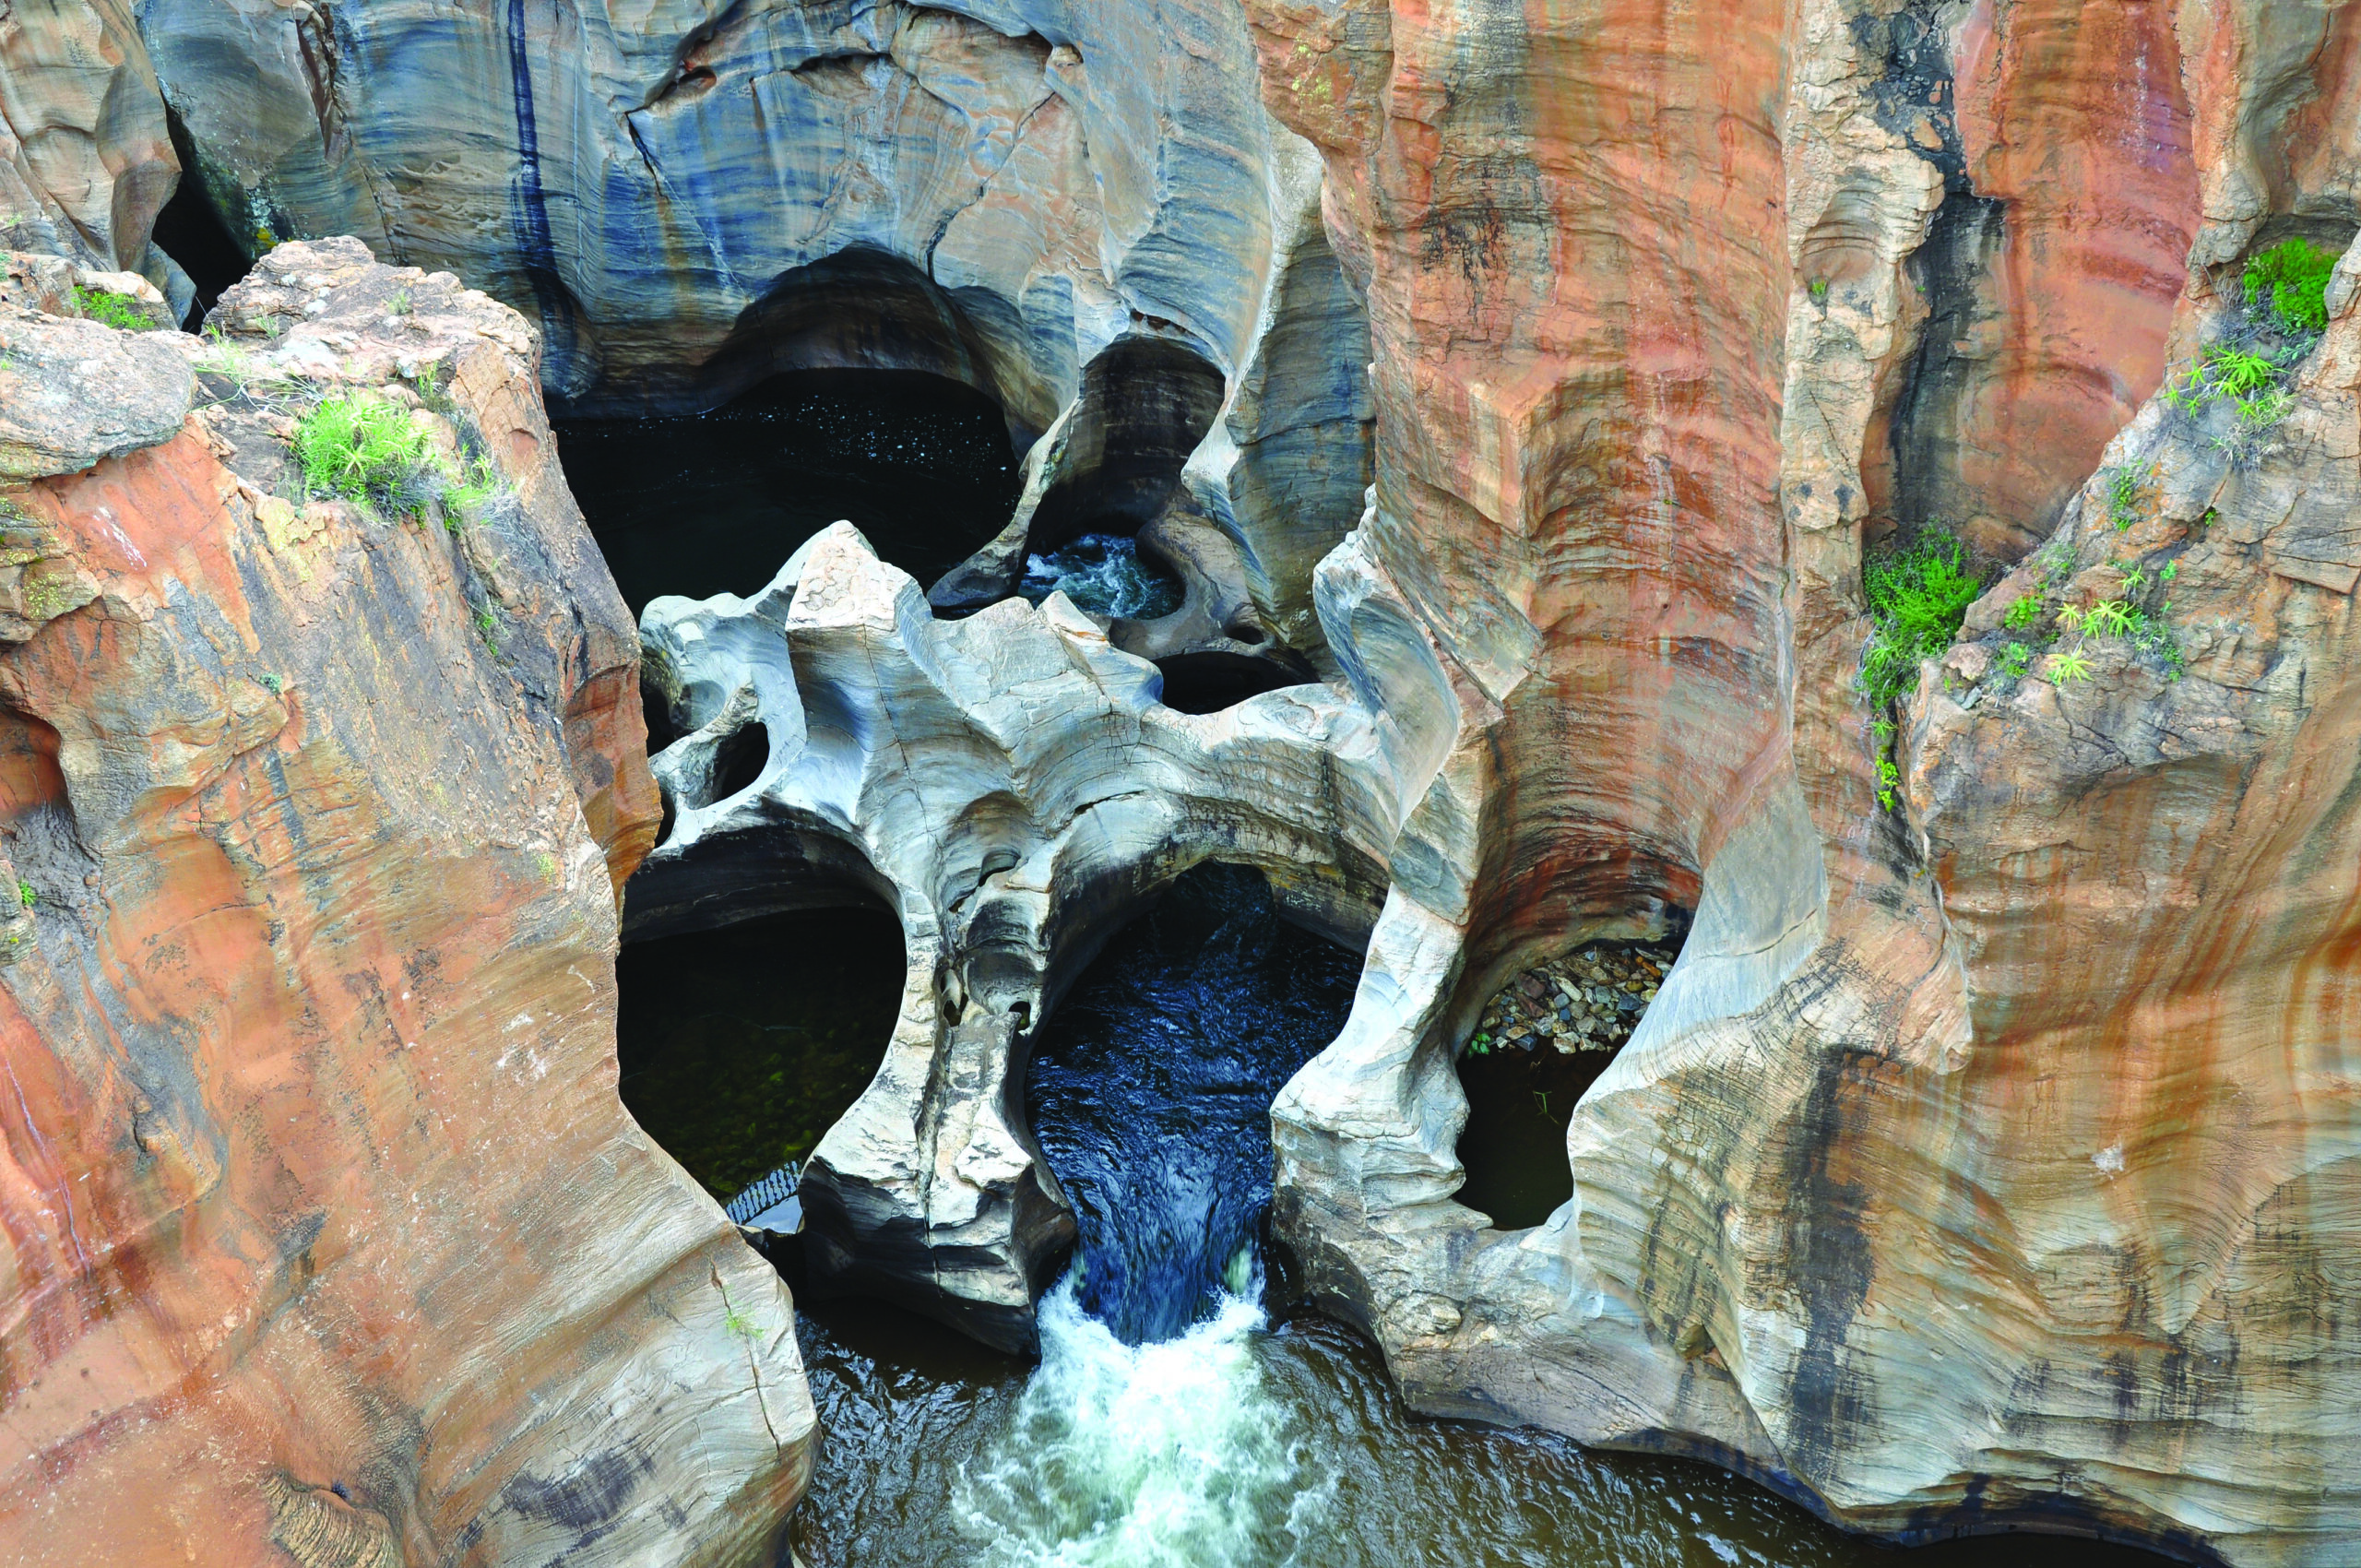 The Bourke's Luck Potholes Panorama route Zuid-Afrika